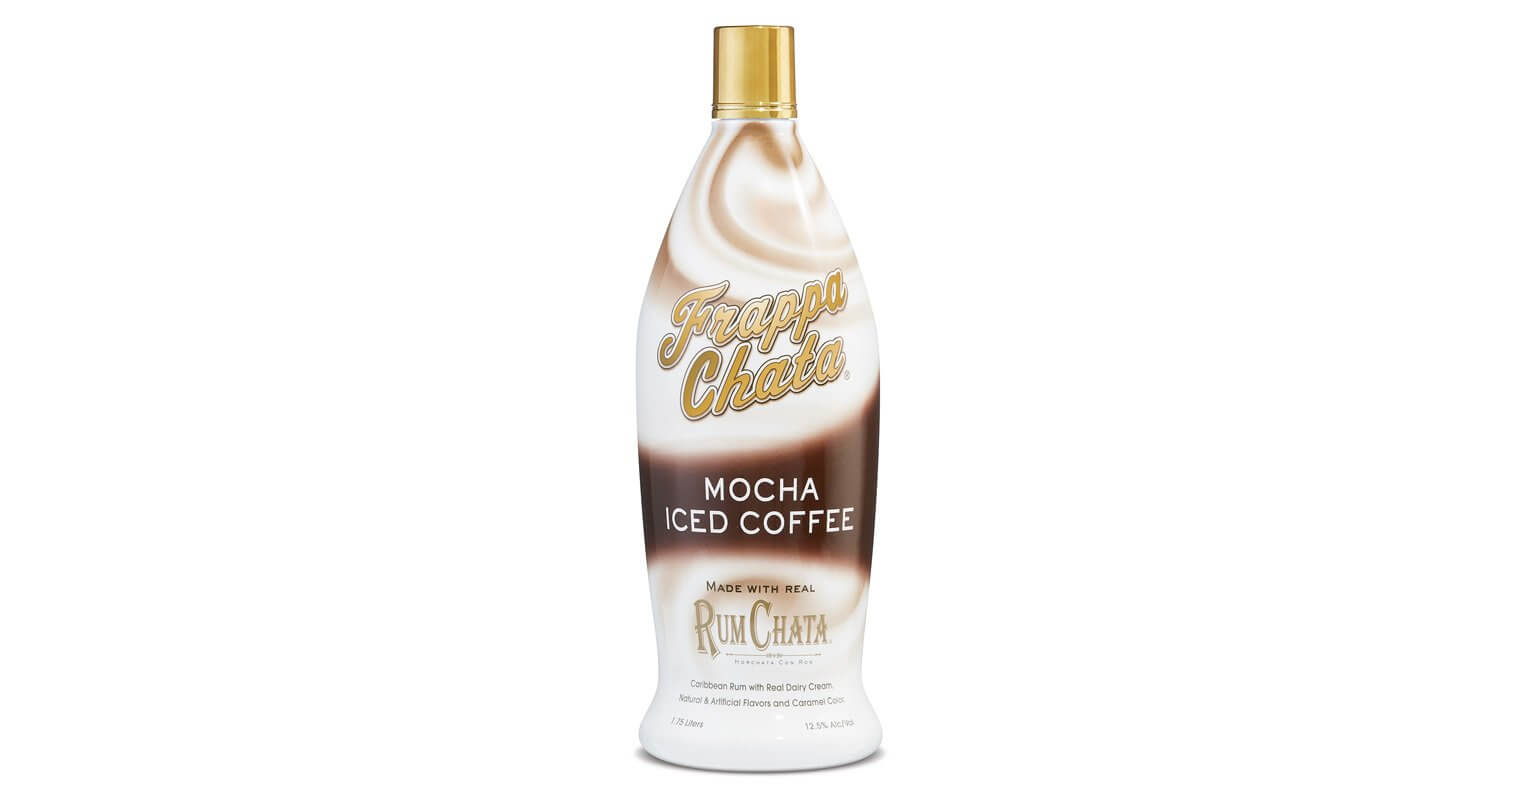 FrappaChata Iced Coffee Mocha Flavor, bottle on white, featured image